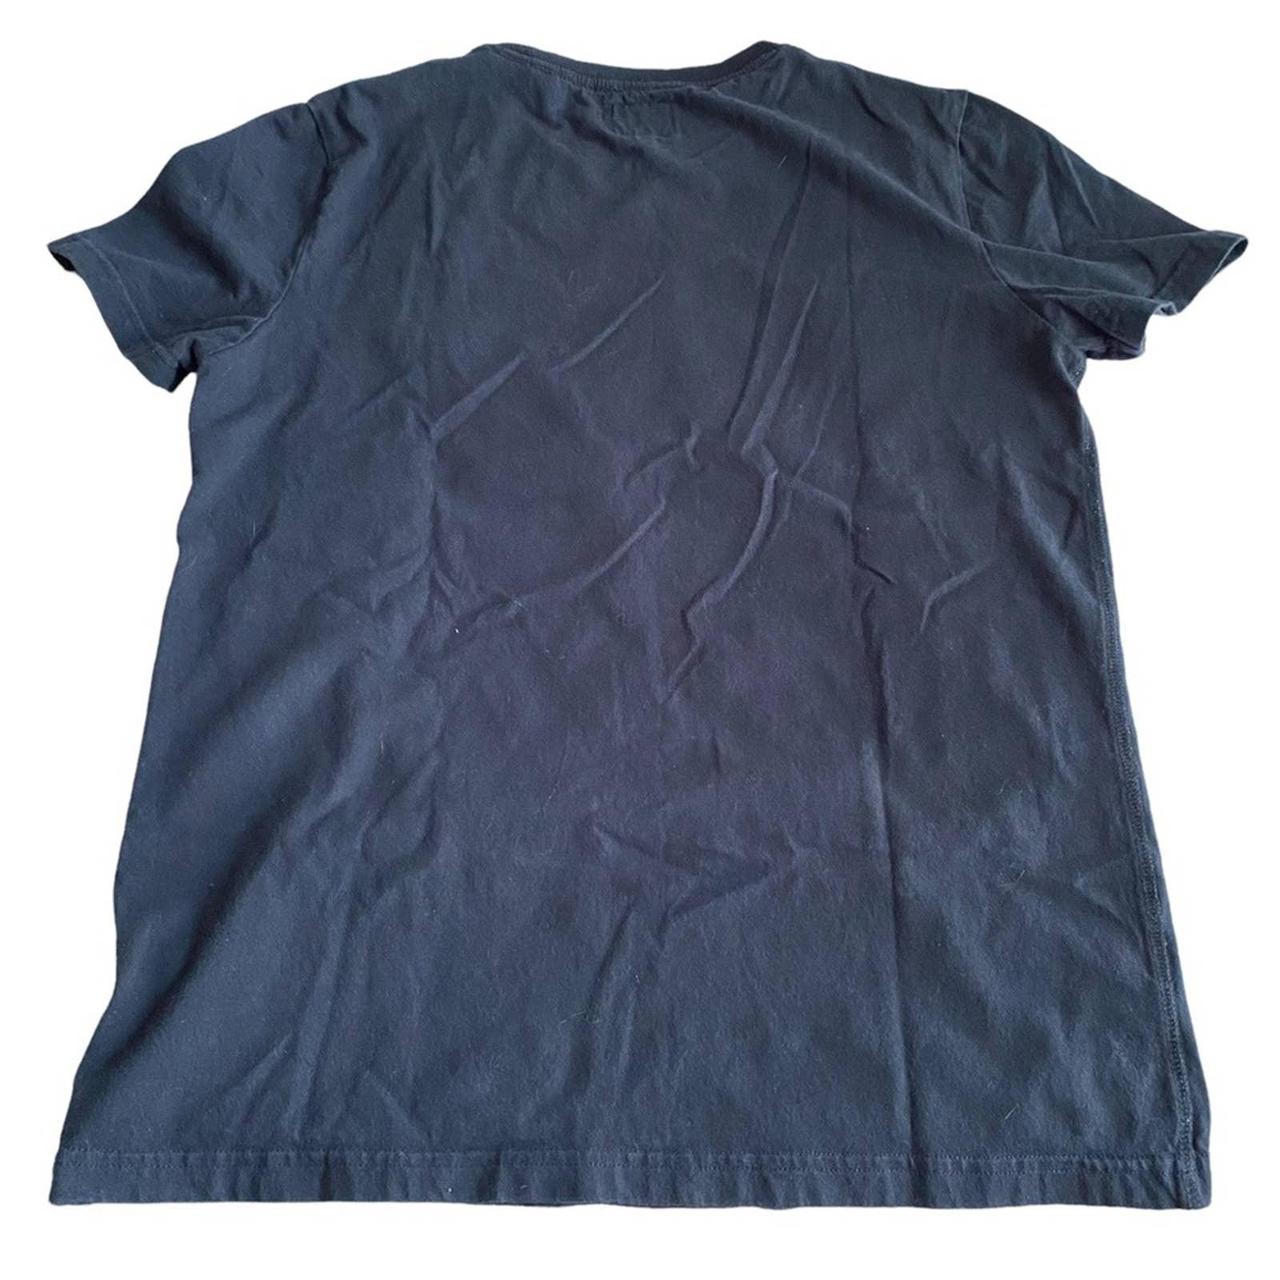 Superdry Women's Black and Blue T-shirt (2)